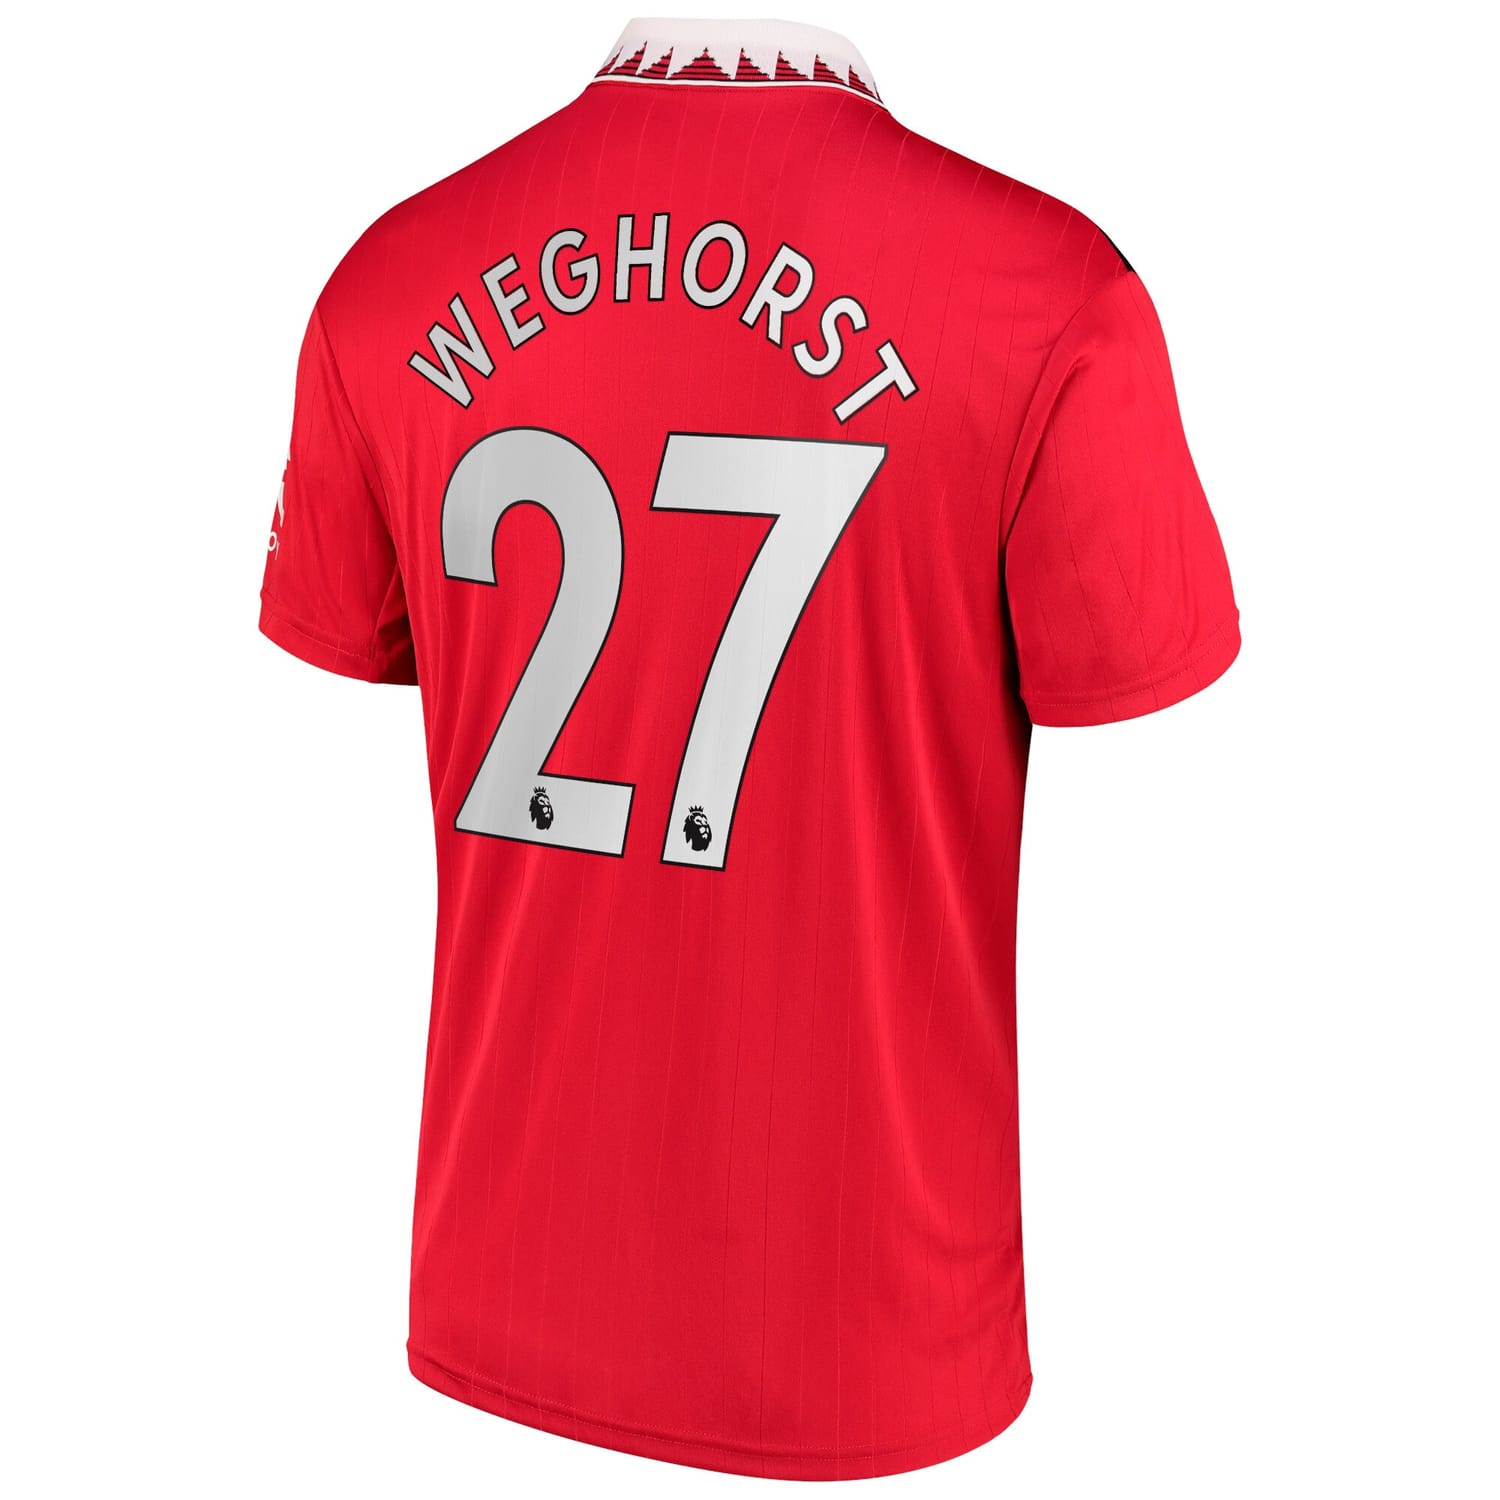 Premier League Manchester United Home Jersey Shirt 2022-23 player Wout Weghorst 27 printing for Men